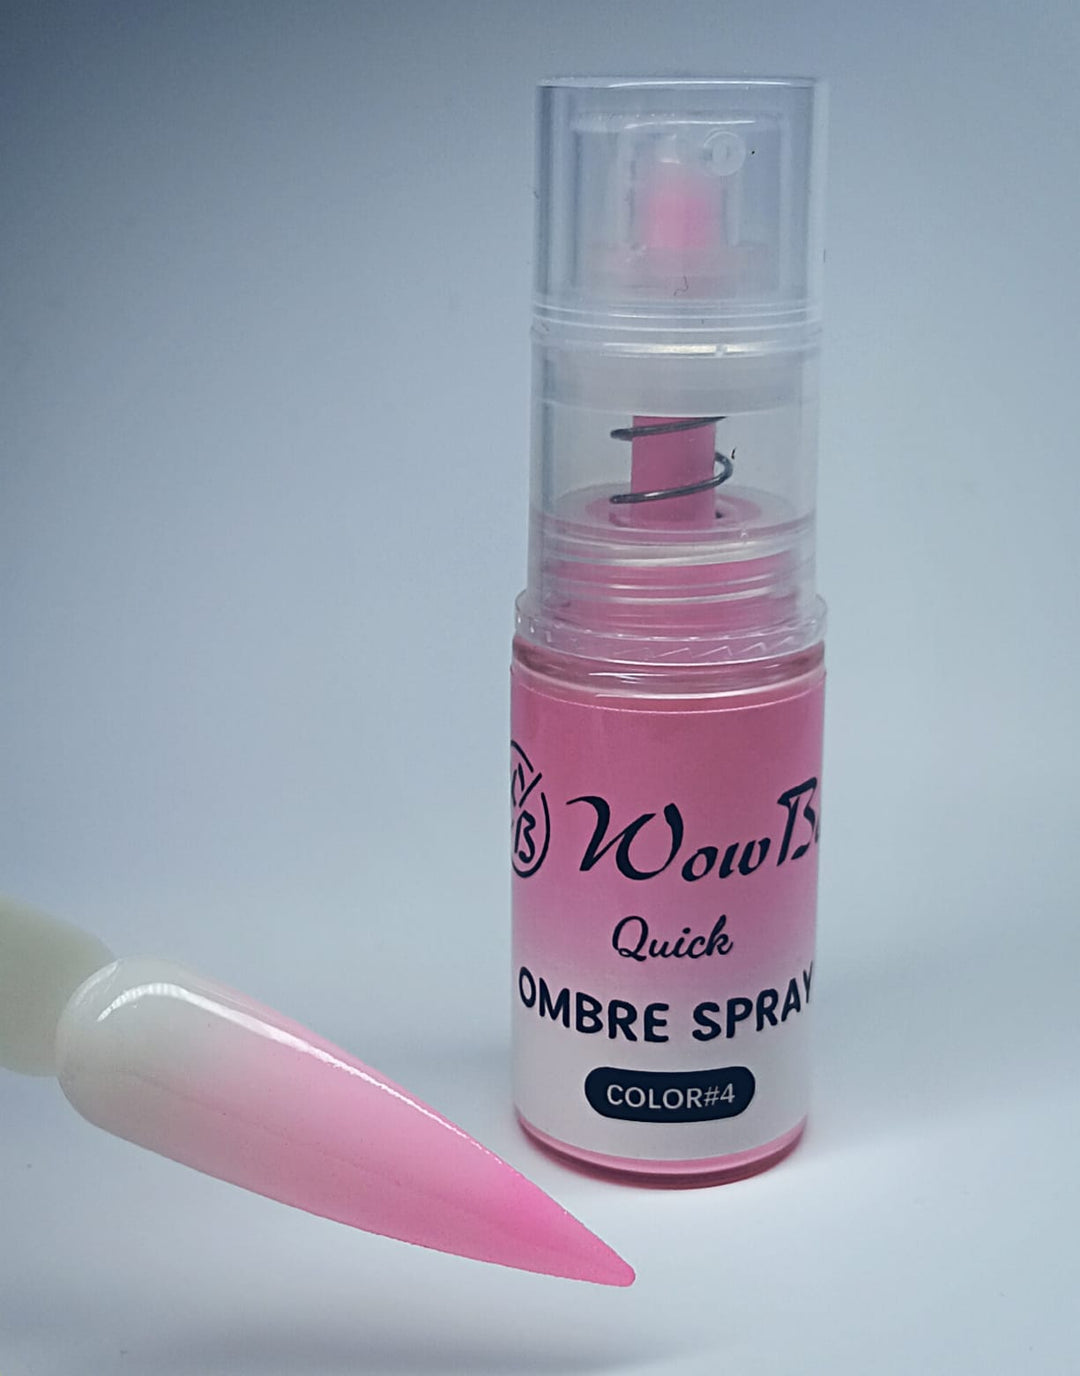 WowBao Nails Quick Ombre Spray - Pink 04